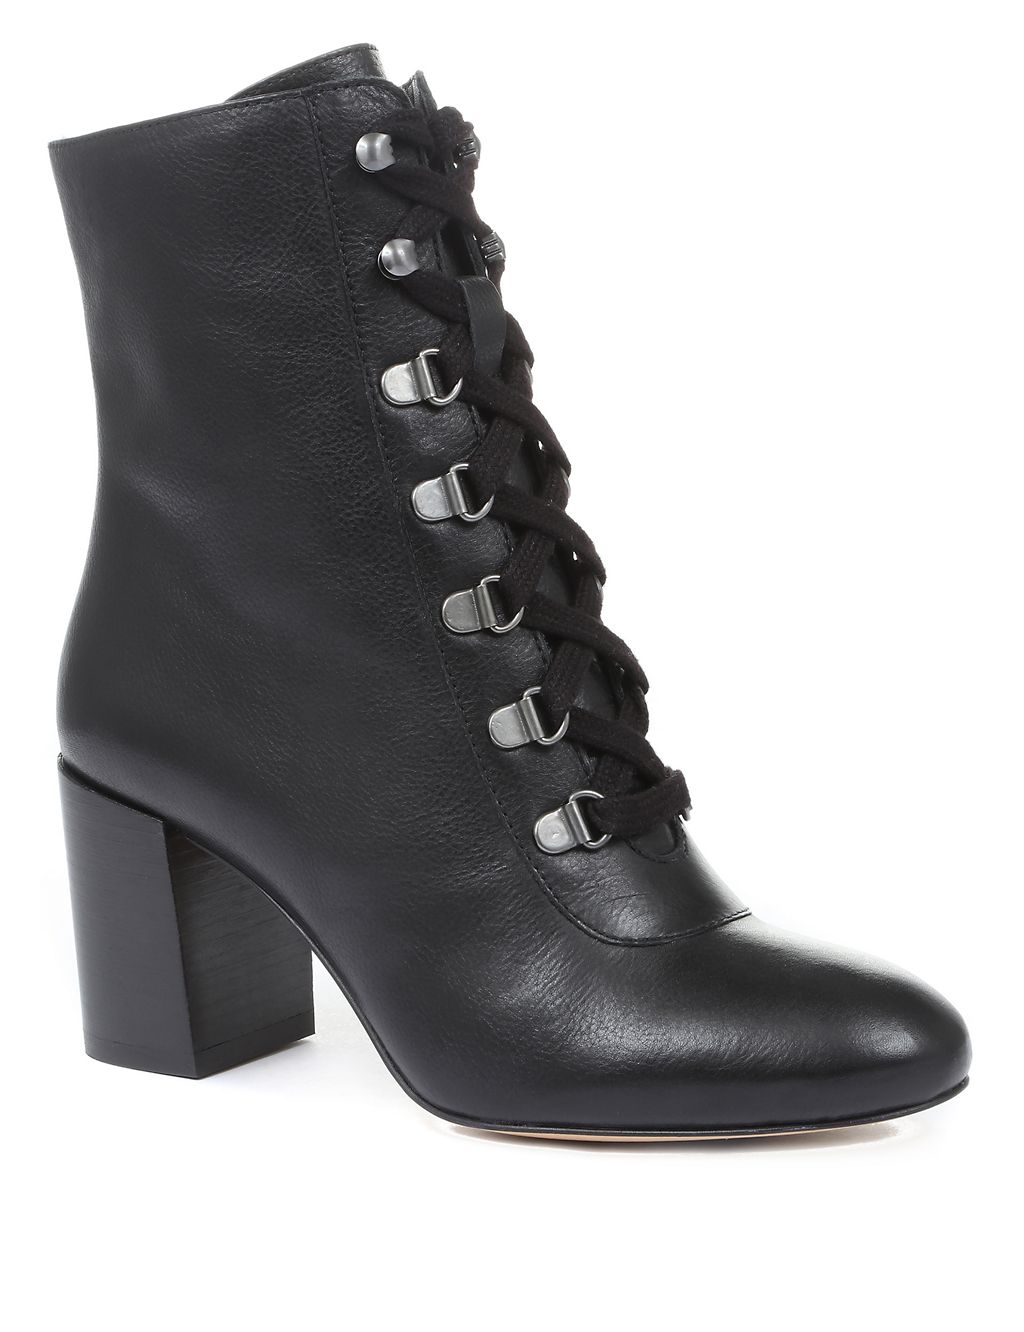 Leather Lace-Up Block Heel Ankle Boots | Jones Bootmaker | M&S